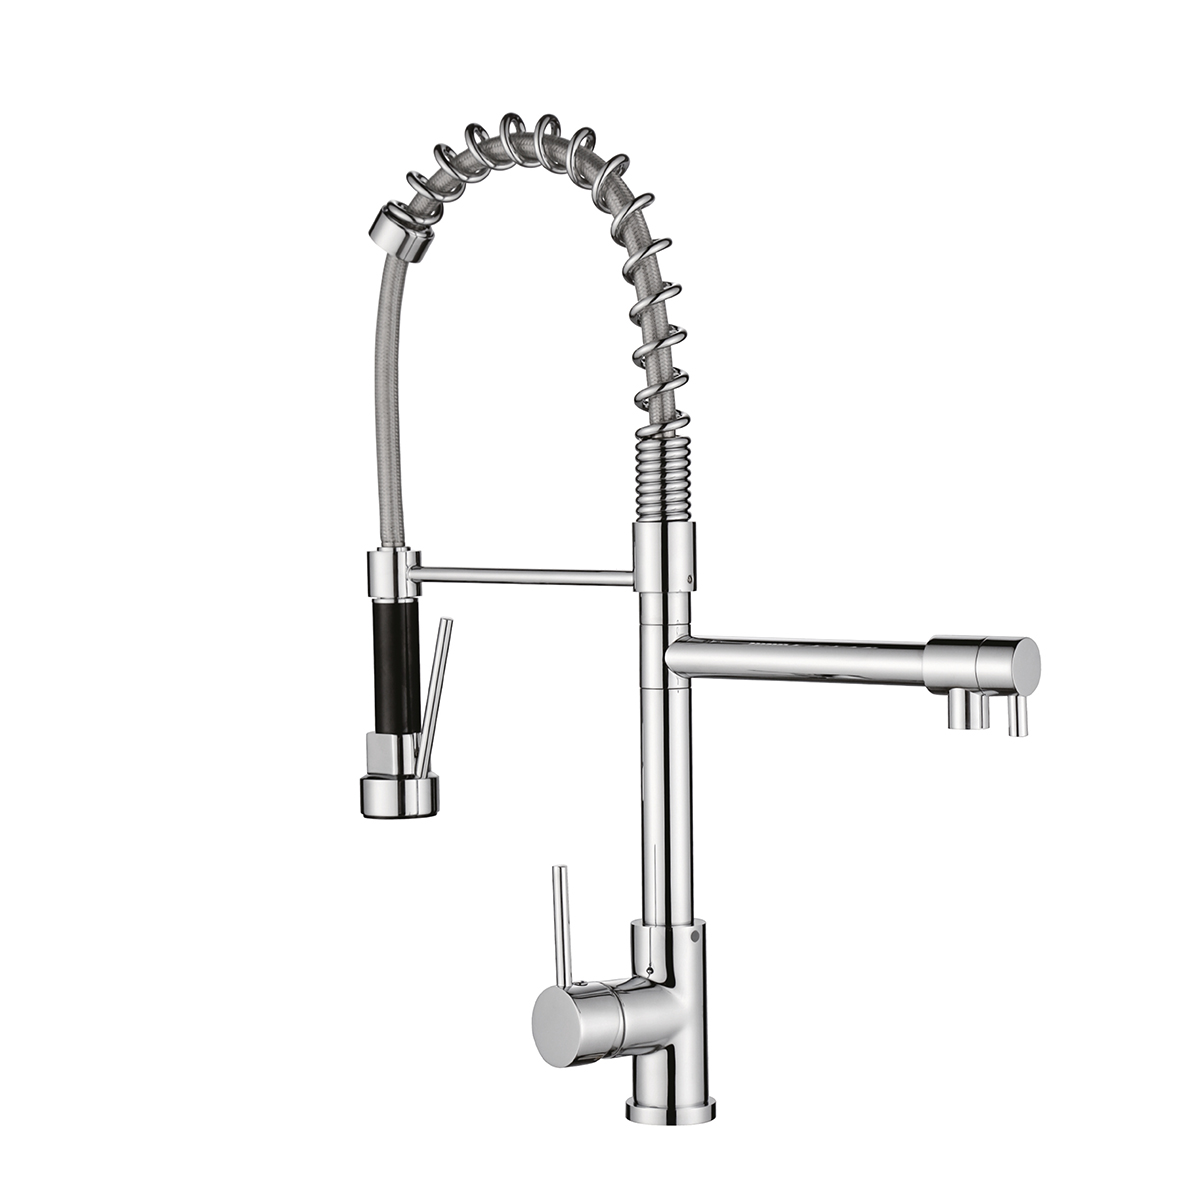 Aquacubic Top Class cUPC Commercial Spring neck Pull Down Kitchen Faucet with Sprayer LED Light